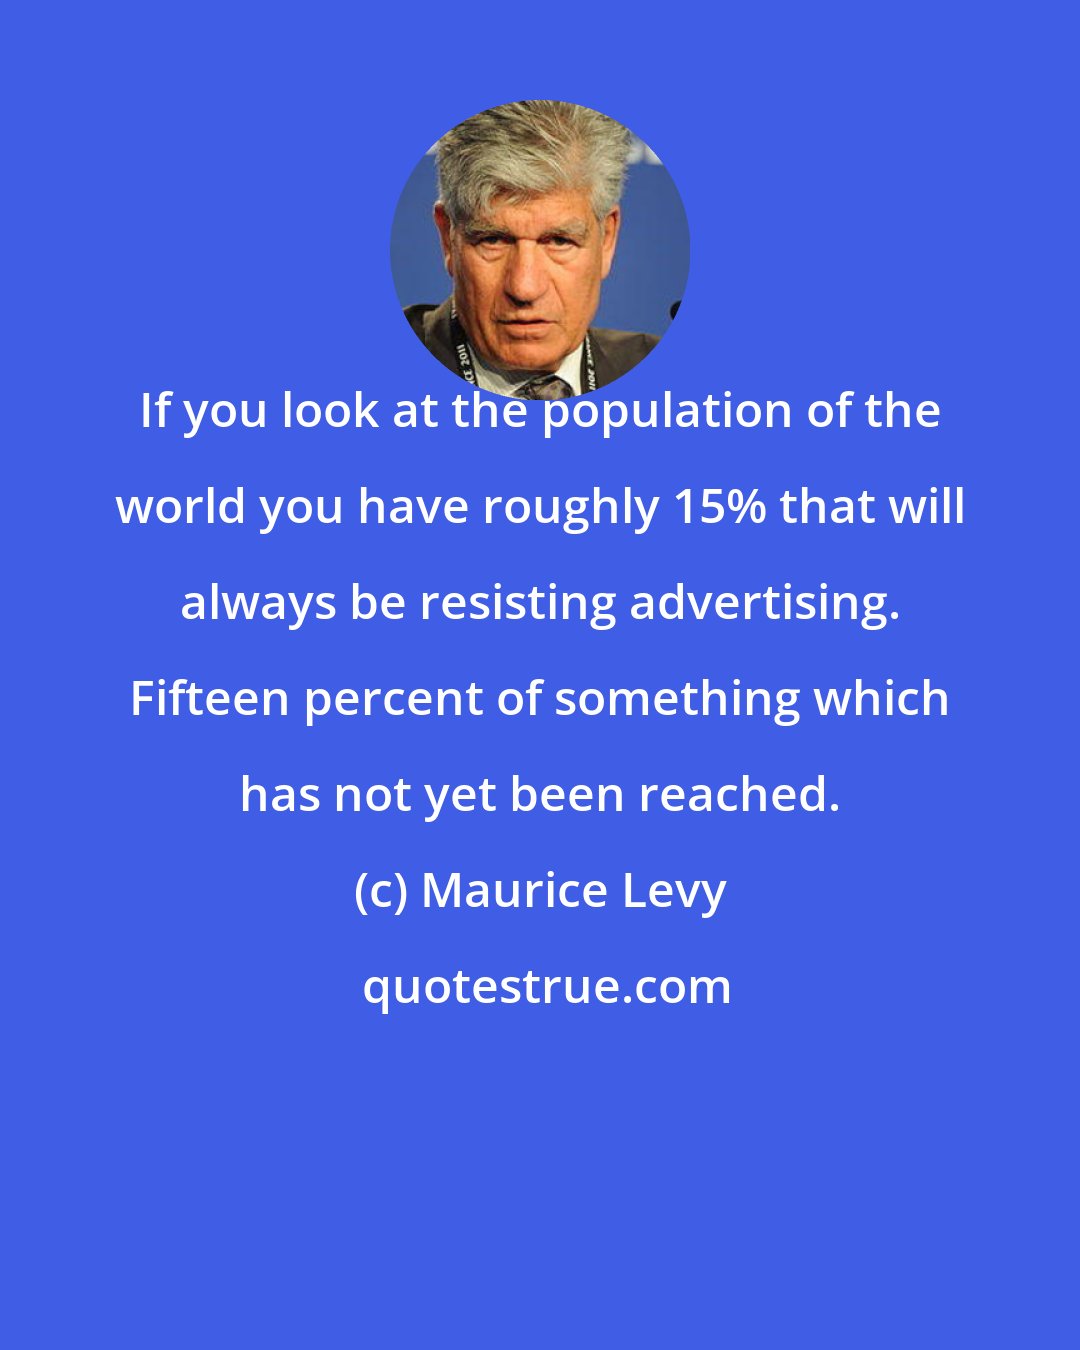 Maurice Levy: If you look at the population of the world you have roughly 15% that will always be resisting advertising. Fifteen percent of something which has not yet been reached.